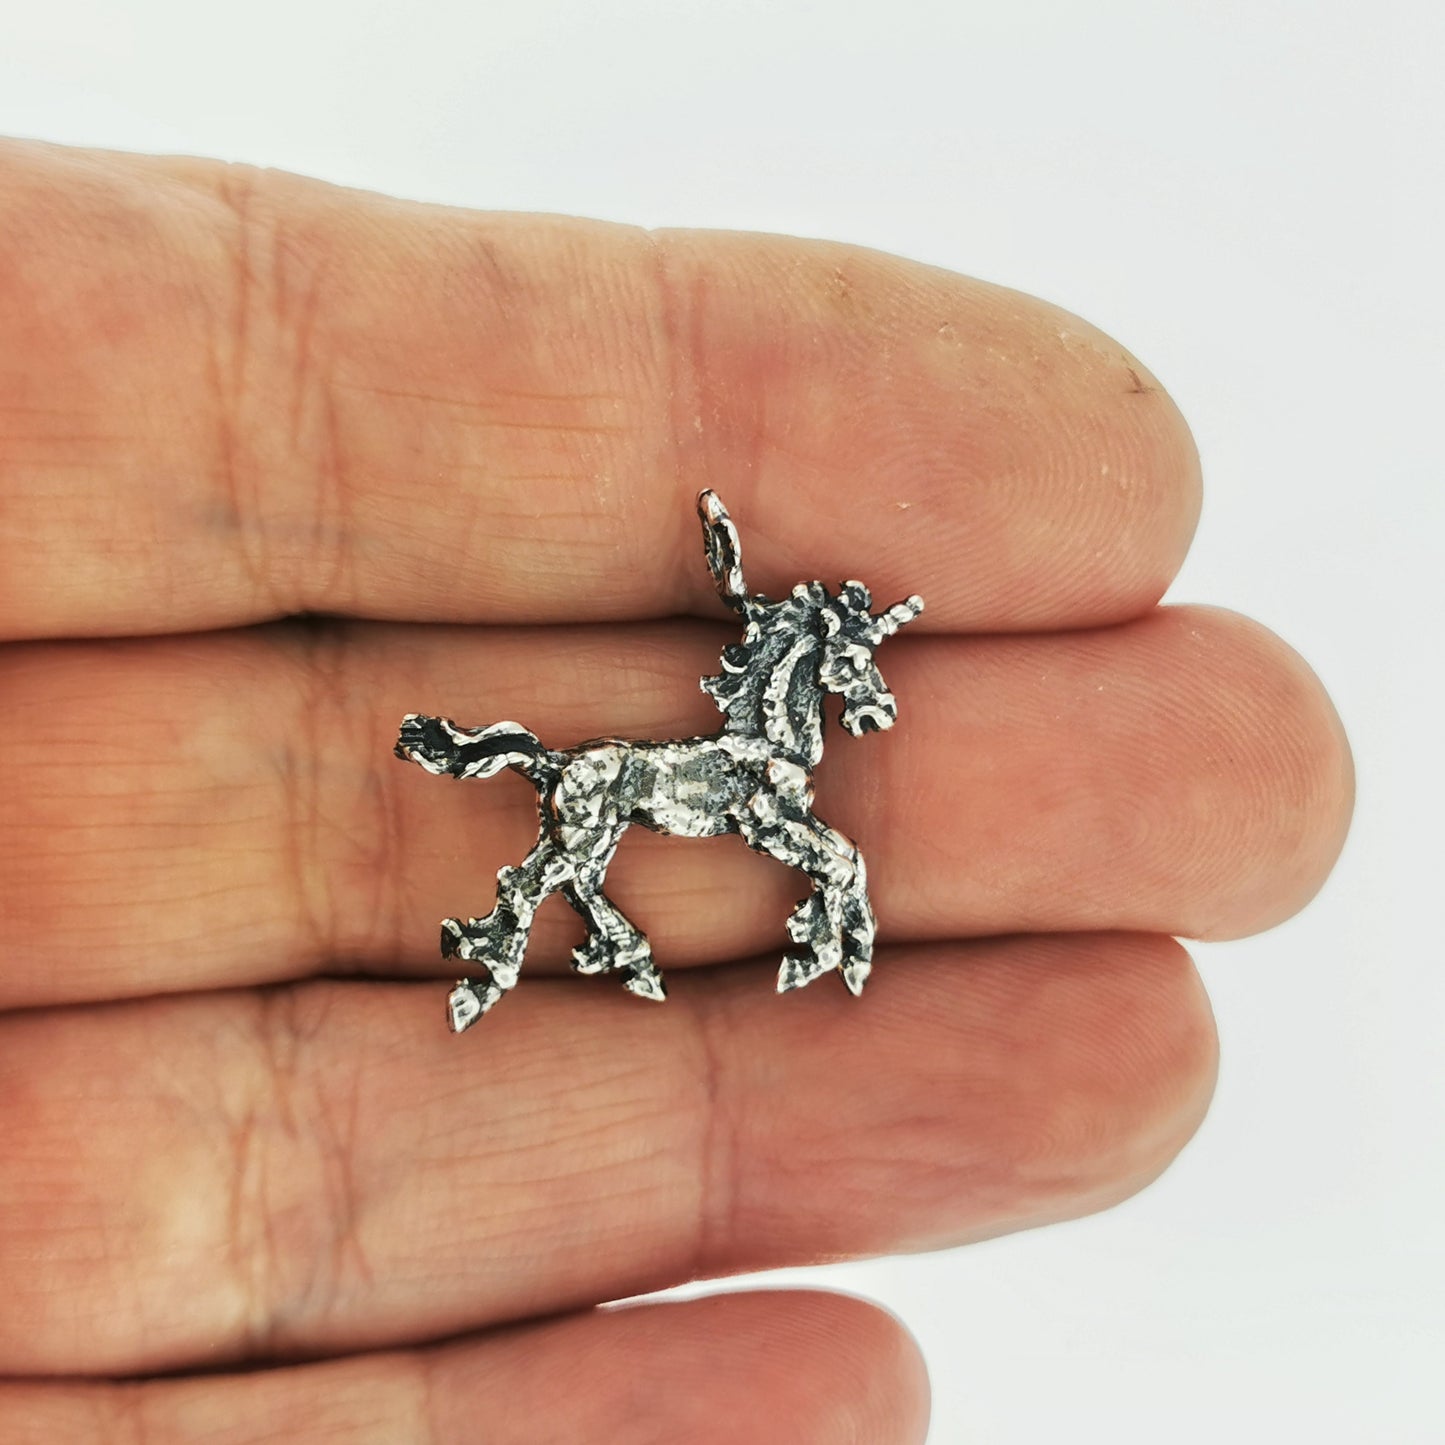 3D Unicorn Charm in Sterling Silver or Antique Bronze, Vintage Unicorn Charm, Silver Unicorn Ring, Sterling Silver Unicorn Charm, 3D Sterling Silver Unicorn Charm, 3D Unicorn Pendant, Silver Fantasy Jewelry, Silver Fantasy Jewellery, Small Unicorn Charm, Small Unicorn Pendant, 3D Unicorn Charm